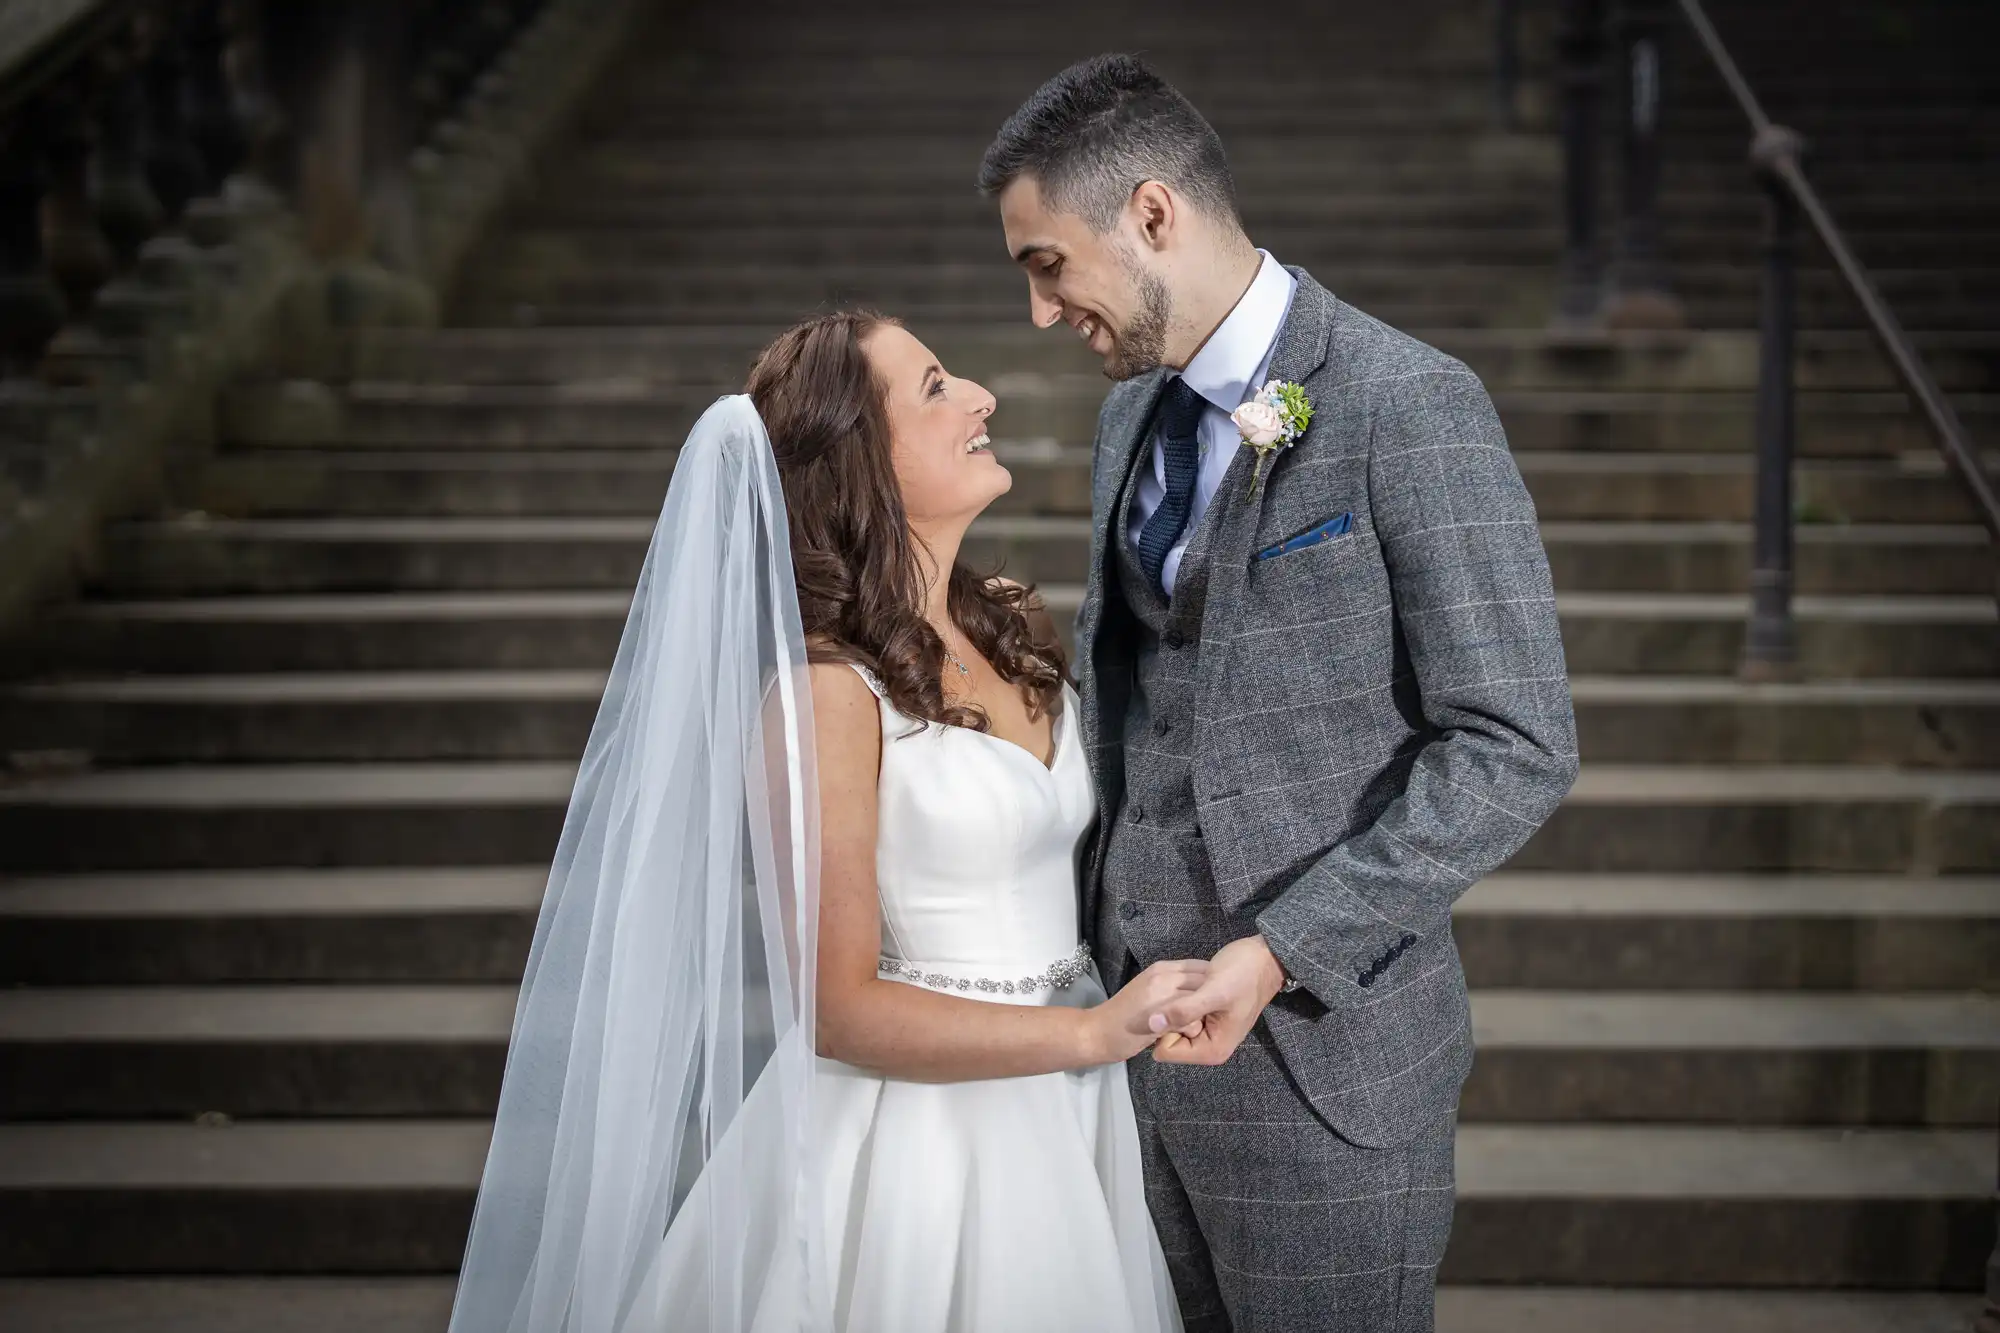 A bride in a white dress and a groom in a gray suit holding hands and gazing at each other on stone stairs.